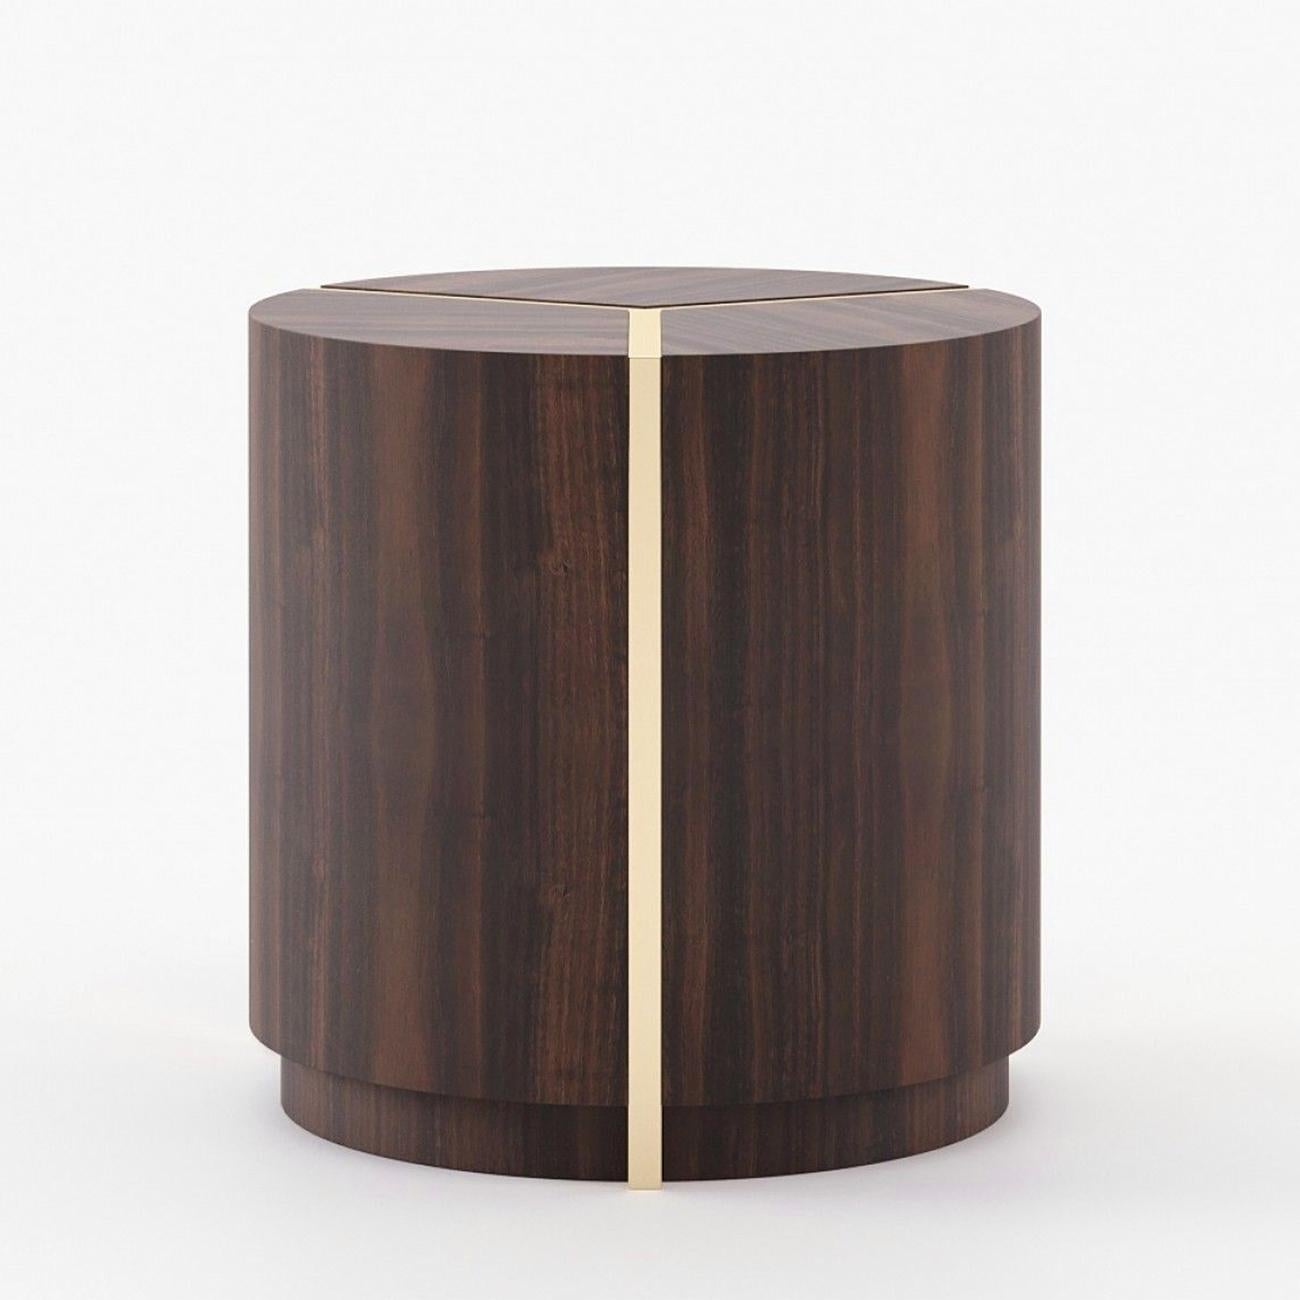 Side table Sega with structure in eucalyptus wood
veneer in matte finish. With stainless steel trim in gold finish.
Also available in ebony glossy, or in grey eucalyptus glossy
or matte, or in old-aged oak matte, or in eucalyptus smocked
glossy,